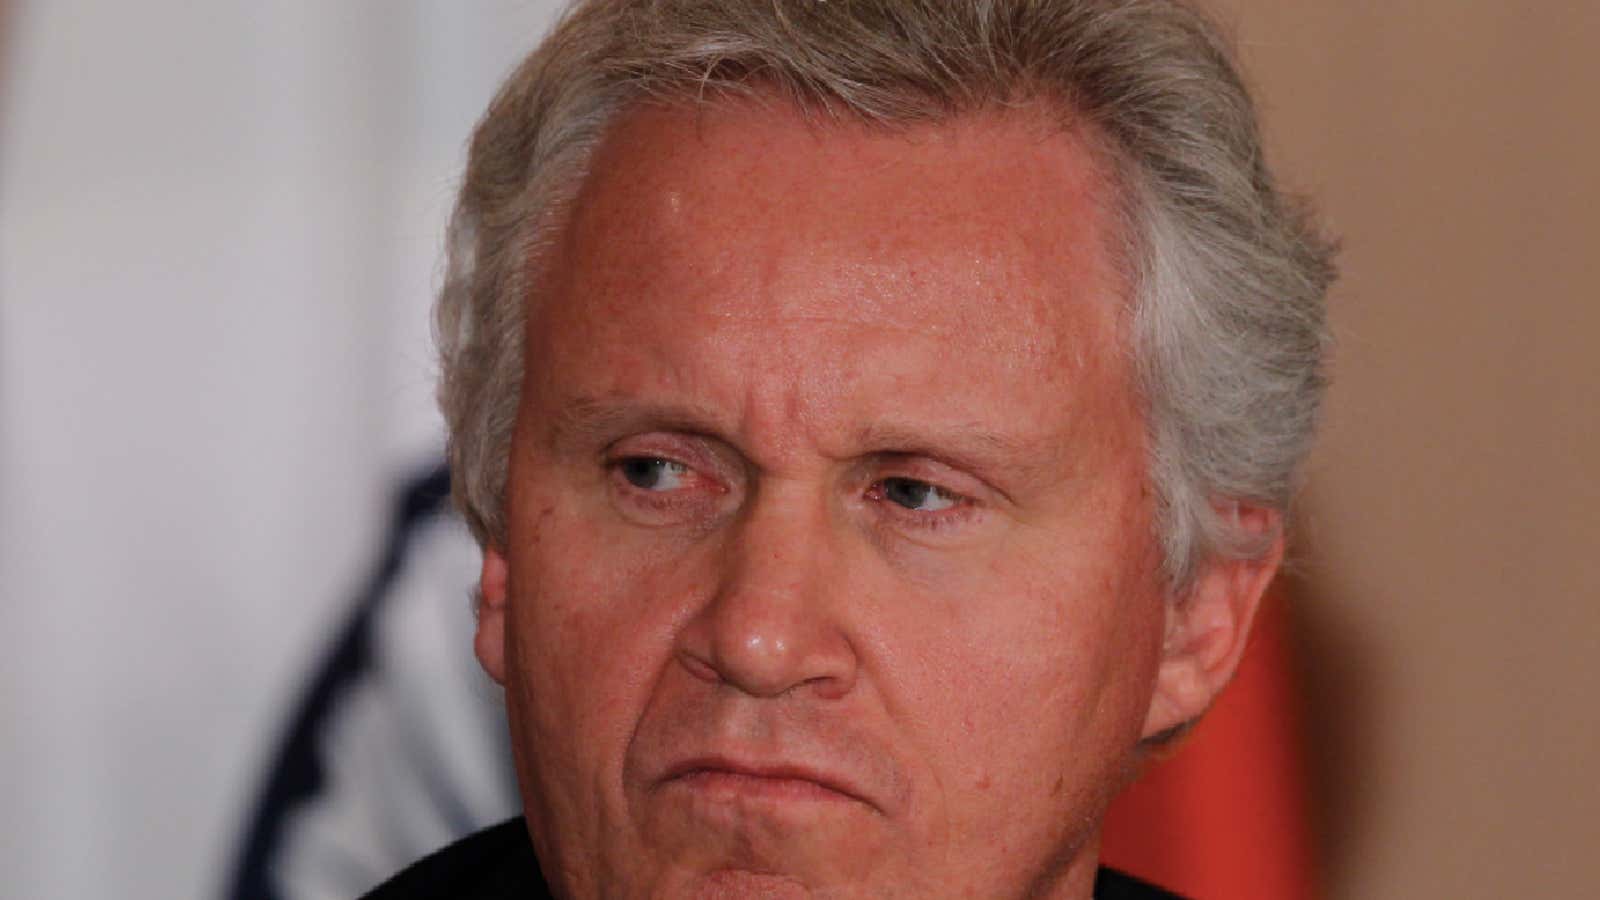 CEO Jeff Immelt wants to make GE less reliant on finance